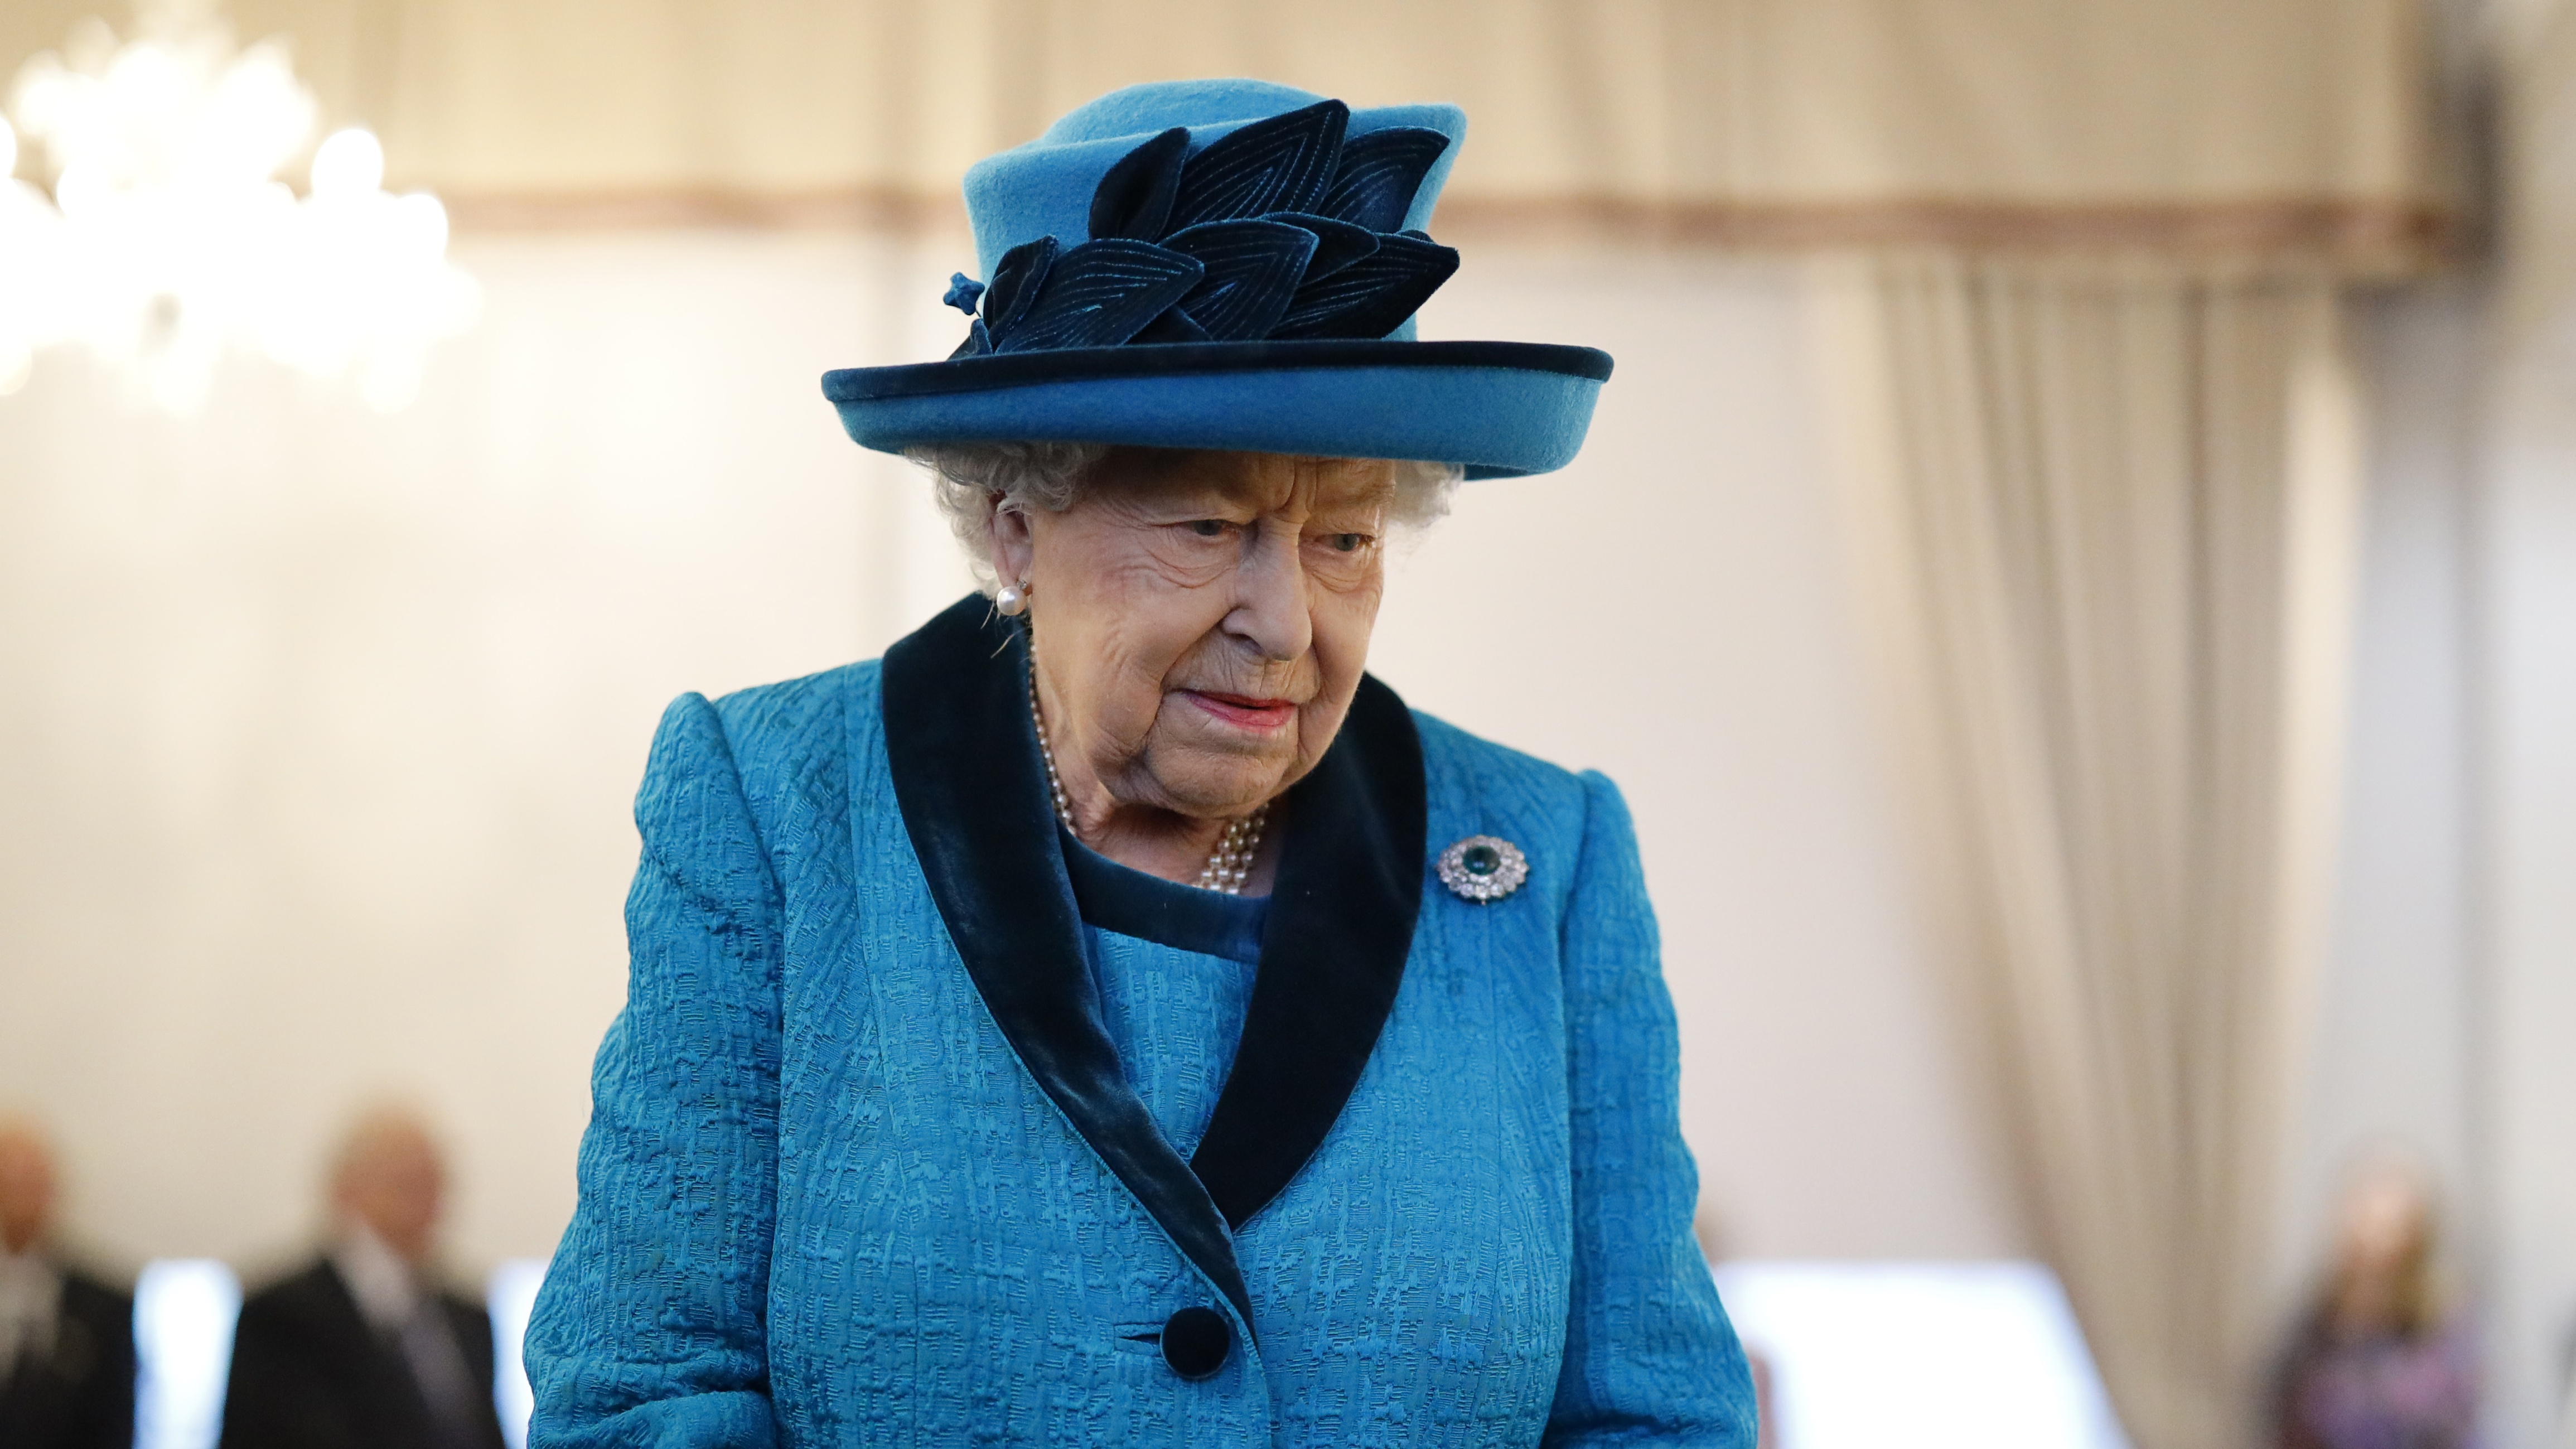 The Queen visits the new headquarters of the Royal Philatelic Society